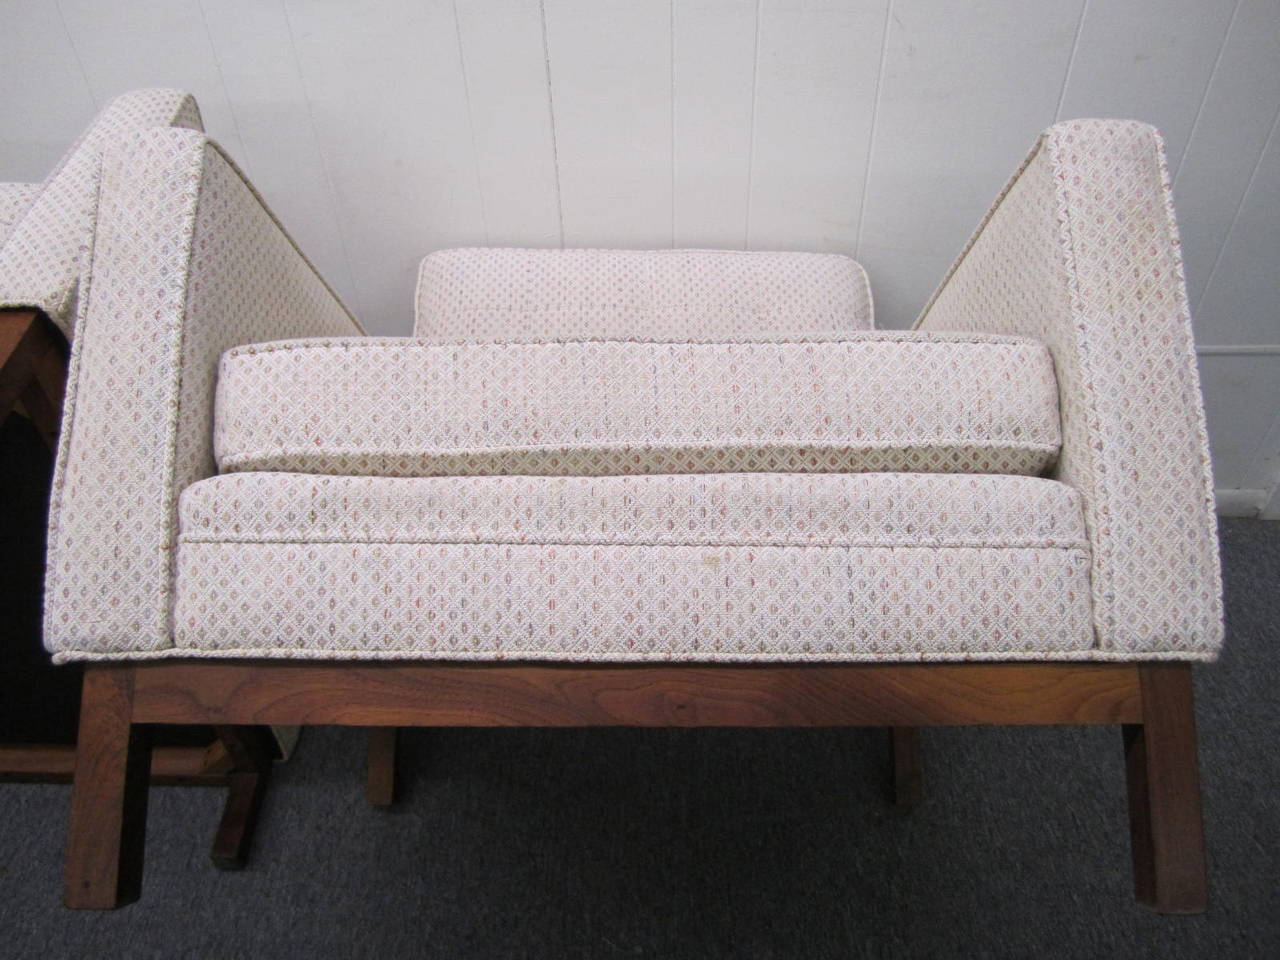 Handsome Pair of Harvey Probber Style Cube Arm Chairs Mid-Century Modern In Good Condition For Sale In Pemberton, NJ